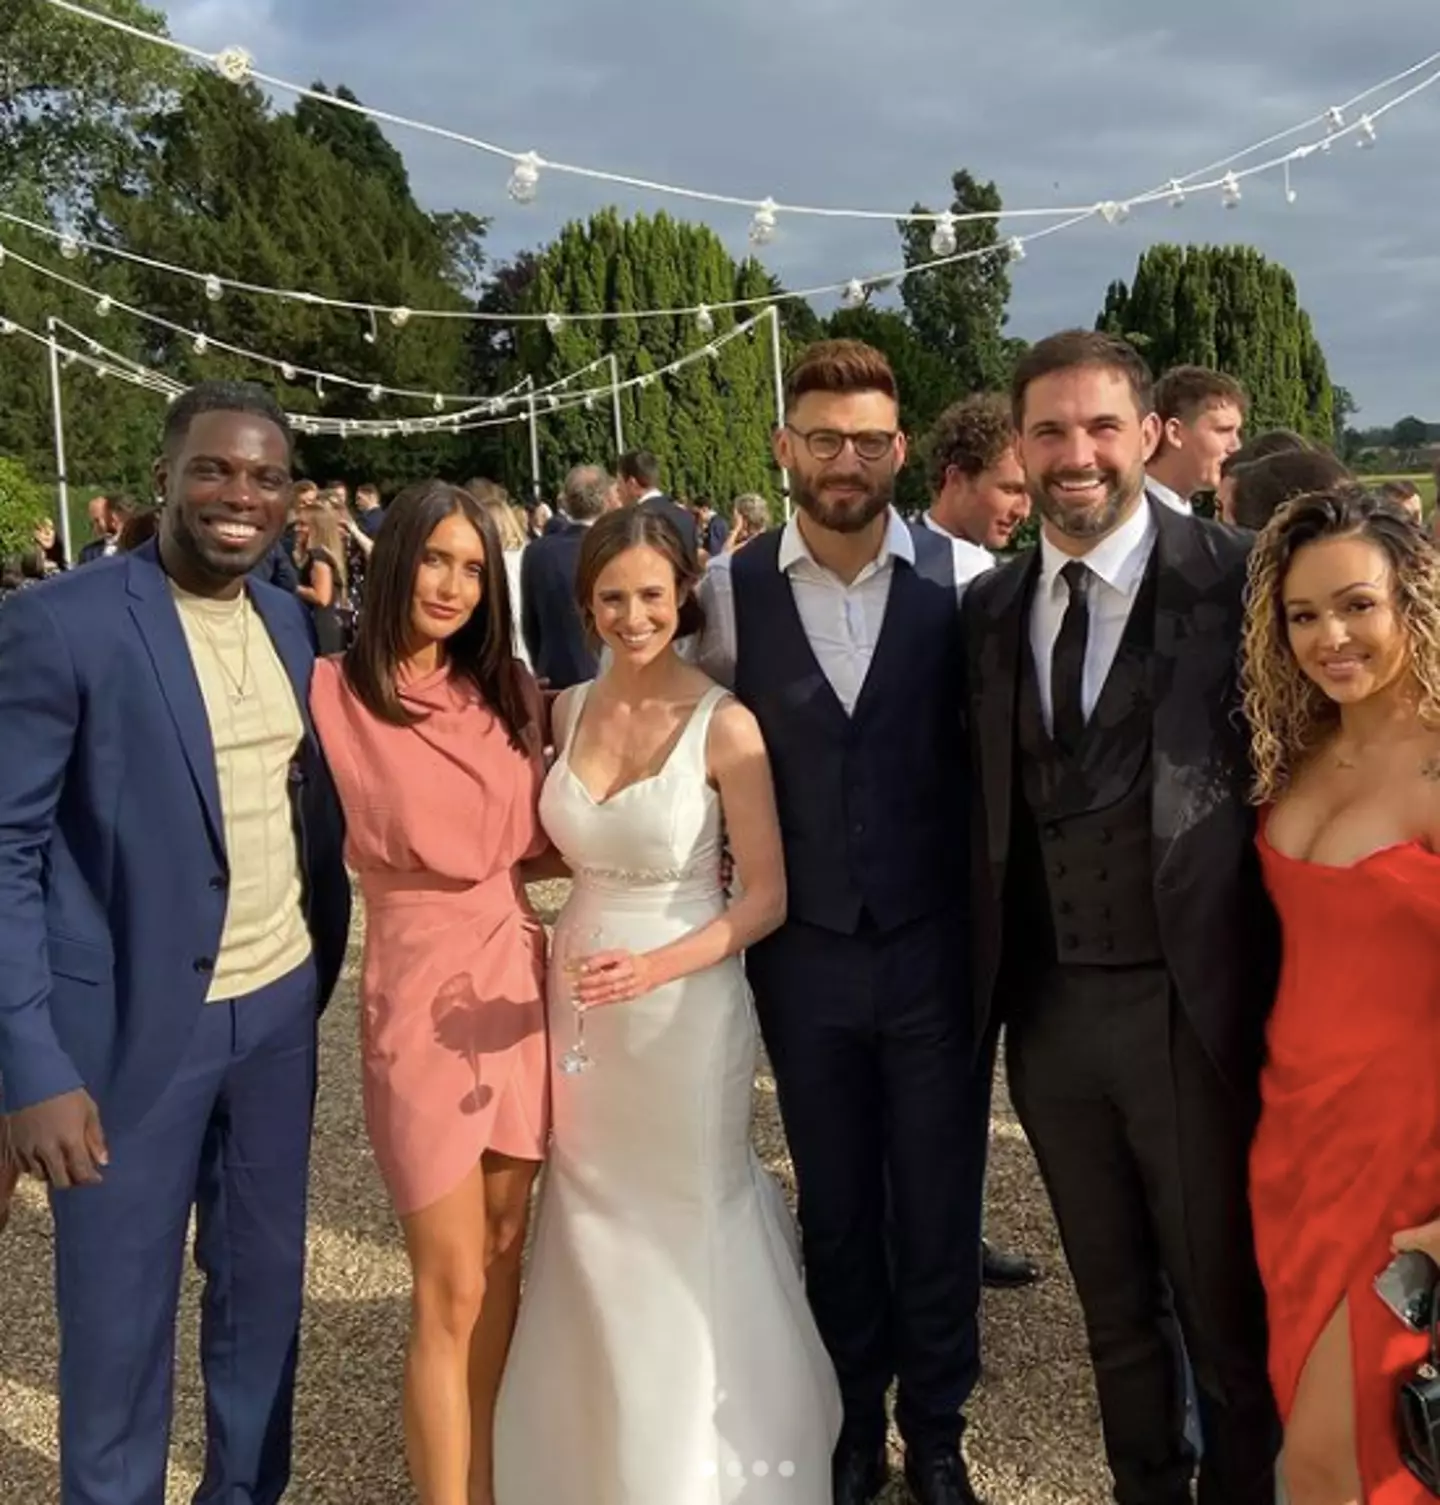 Celebs shared cute pictures from the nuptials (